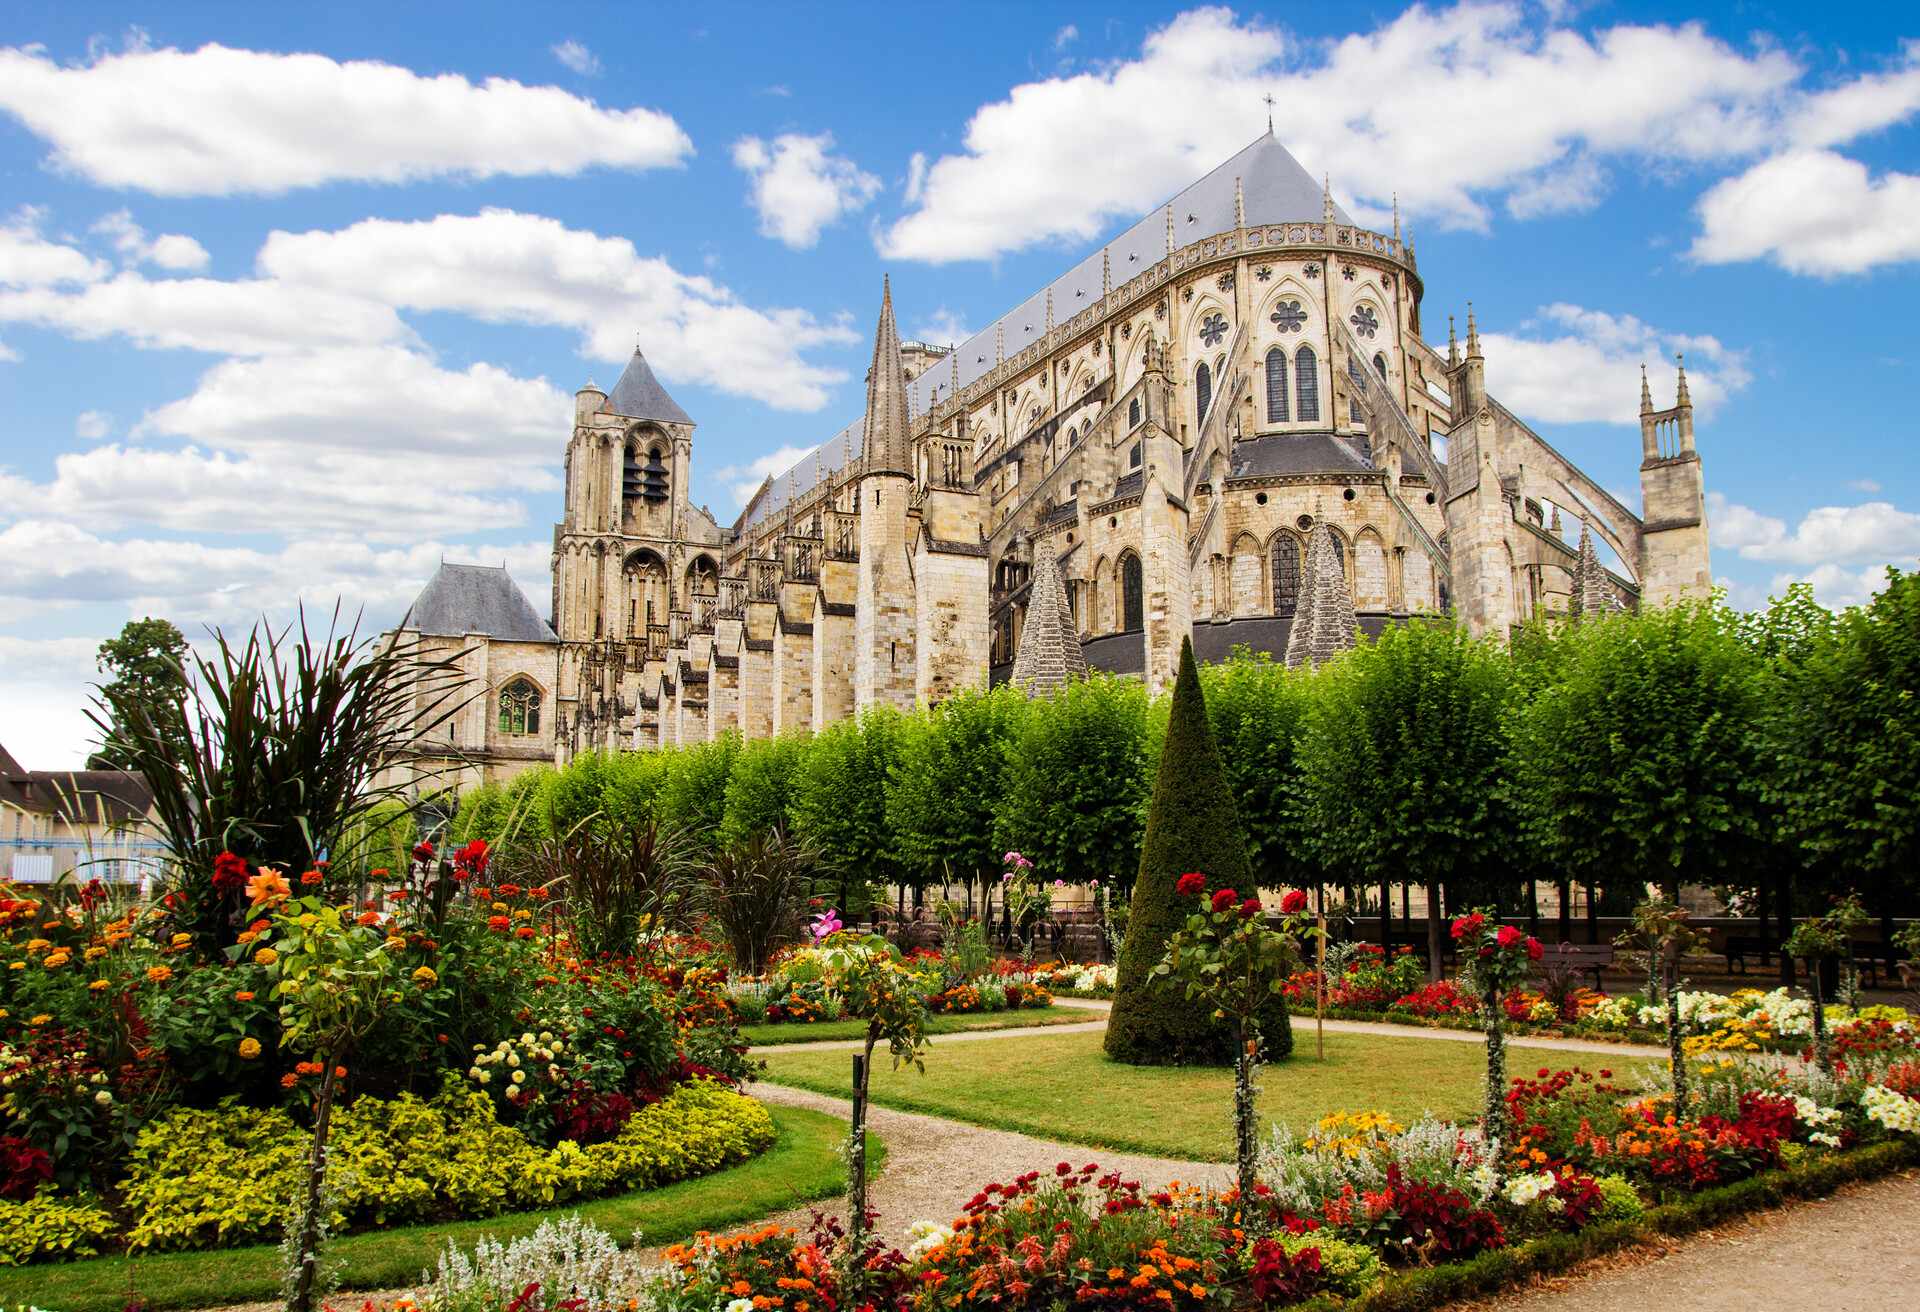 Cathedral in Bourges, beautiful garden, France; Shutterstock ID 604162379